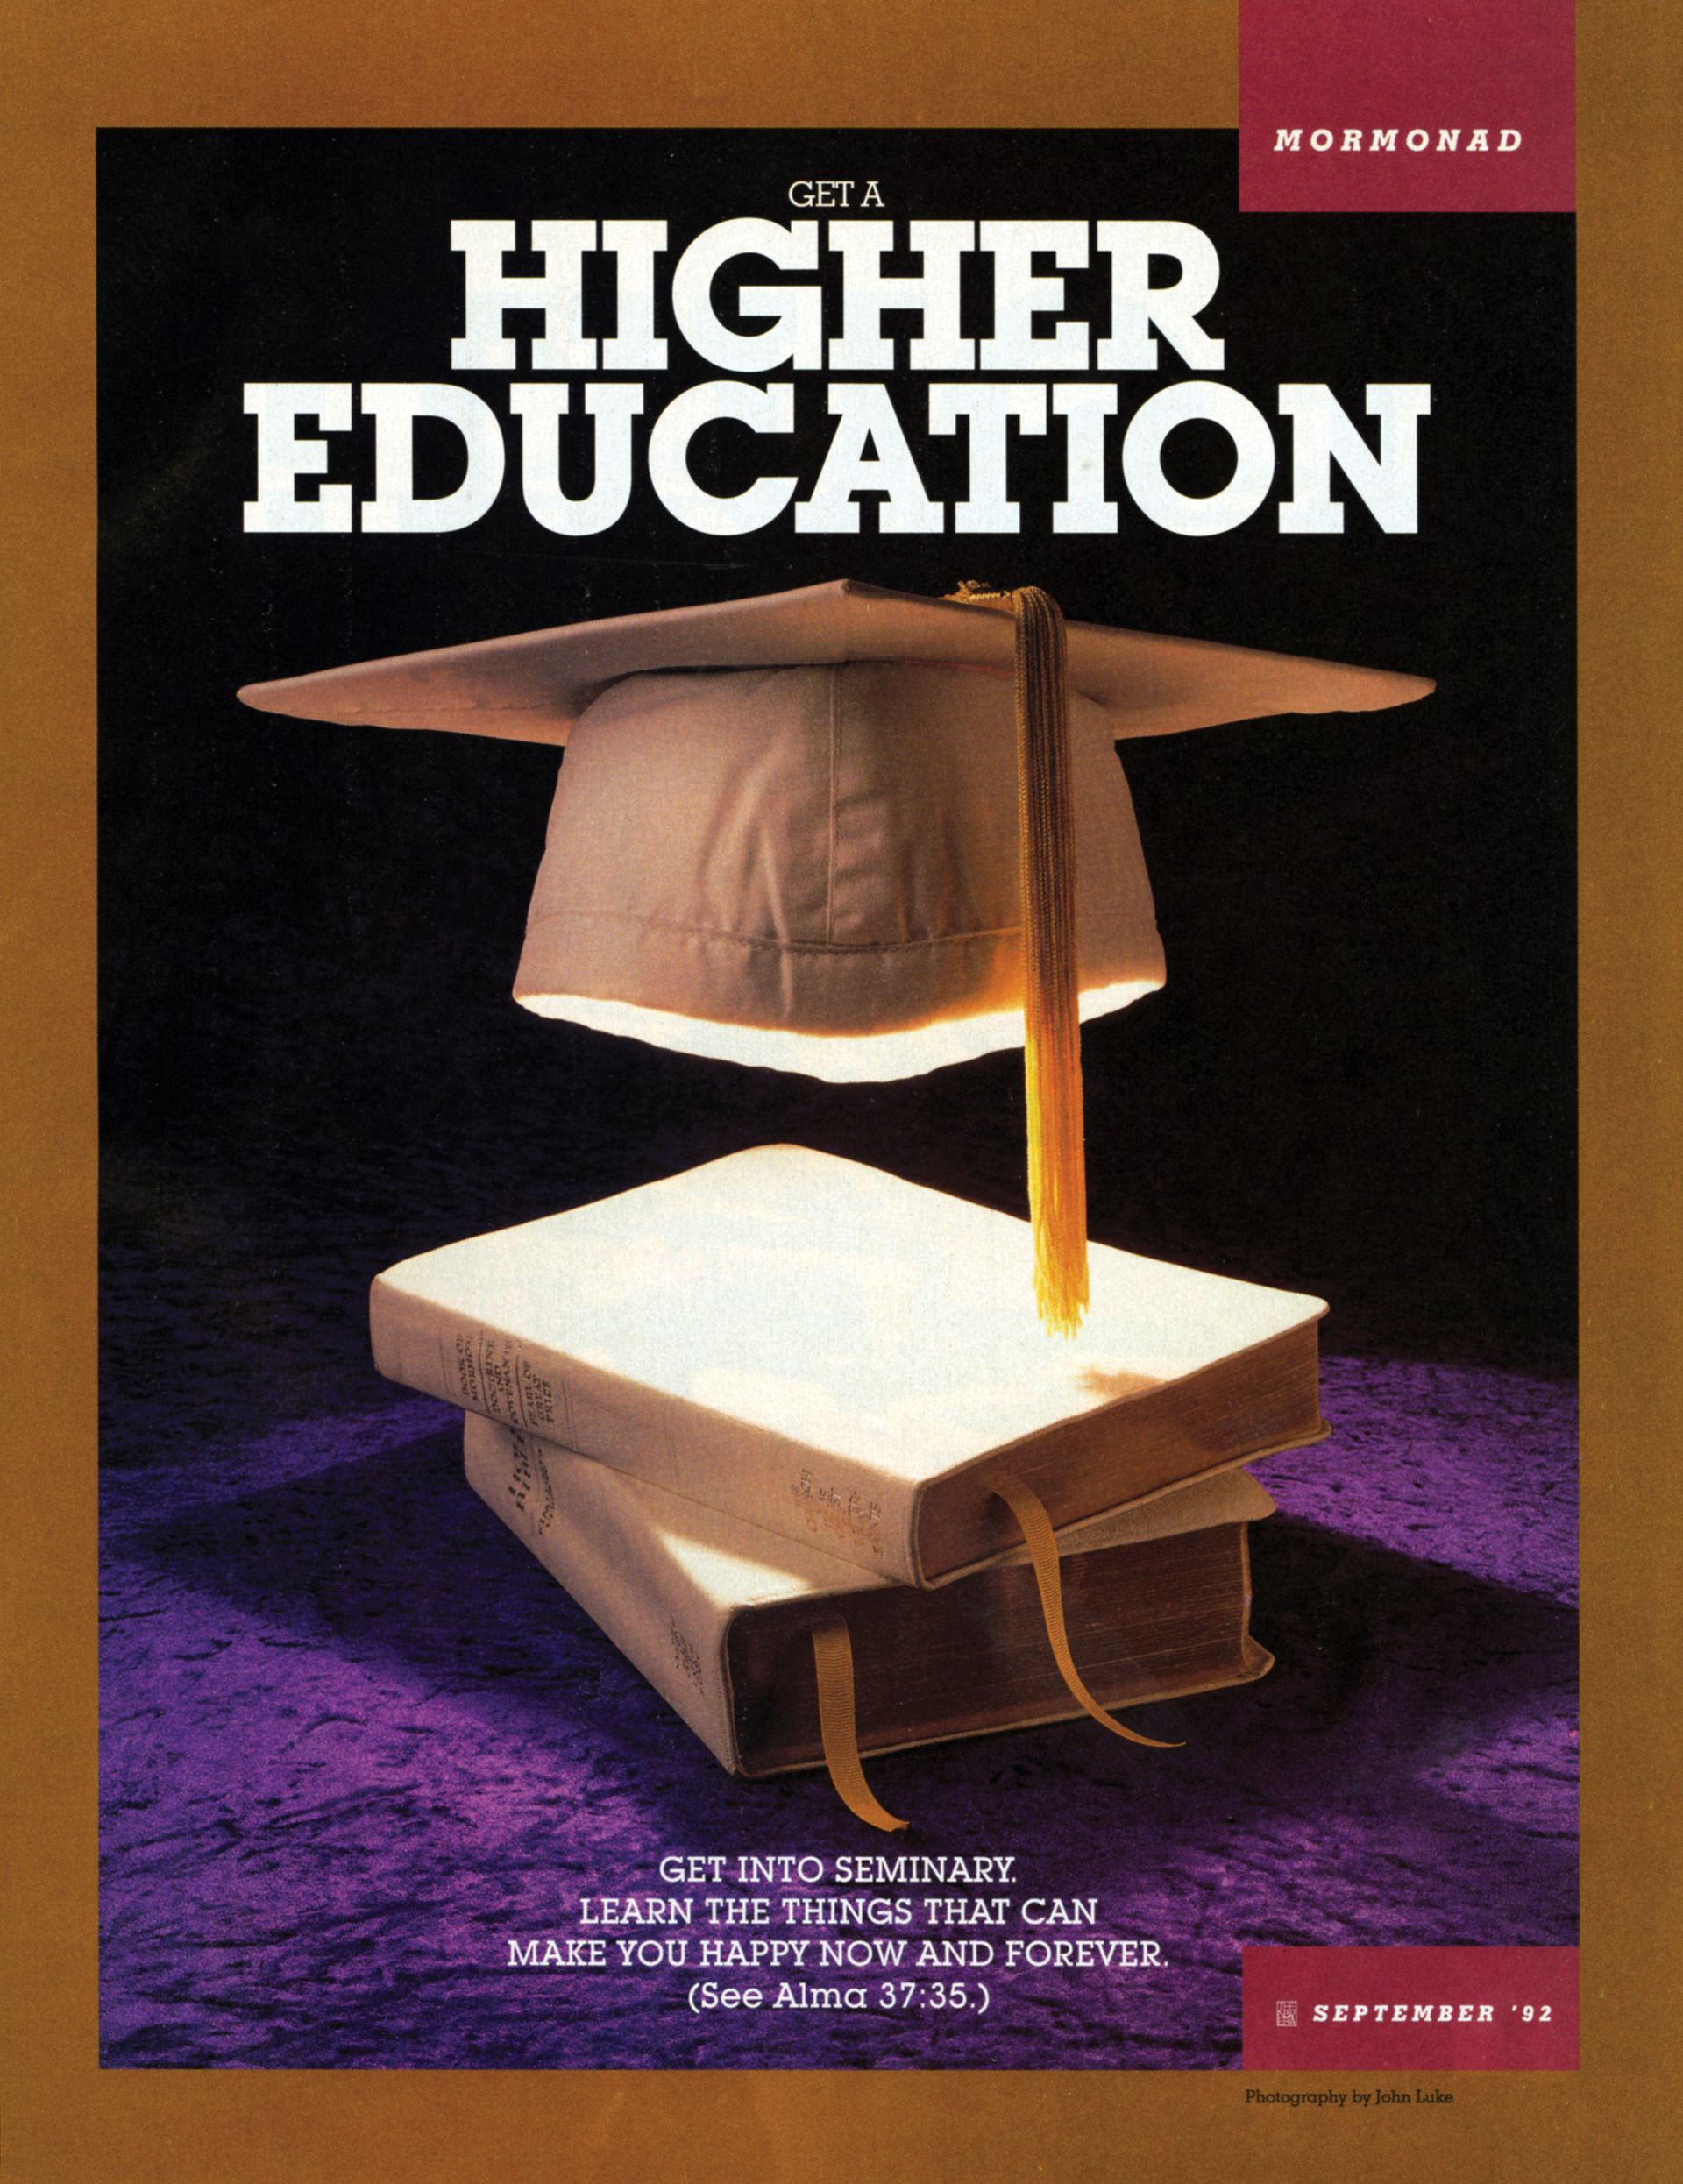 Get a Higher Education. Get into seminary. Learn the things that can make you happy now and forever. (See Alma 37:35.) Sept. 1992 © undefined ipCode 1.